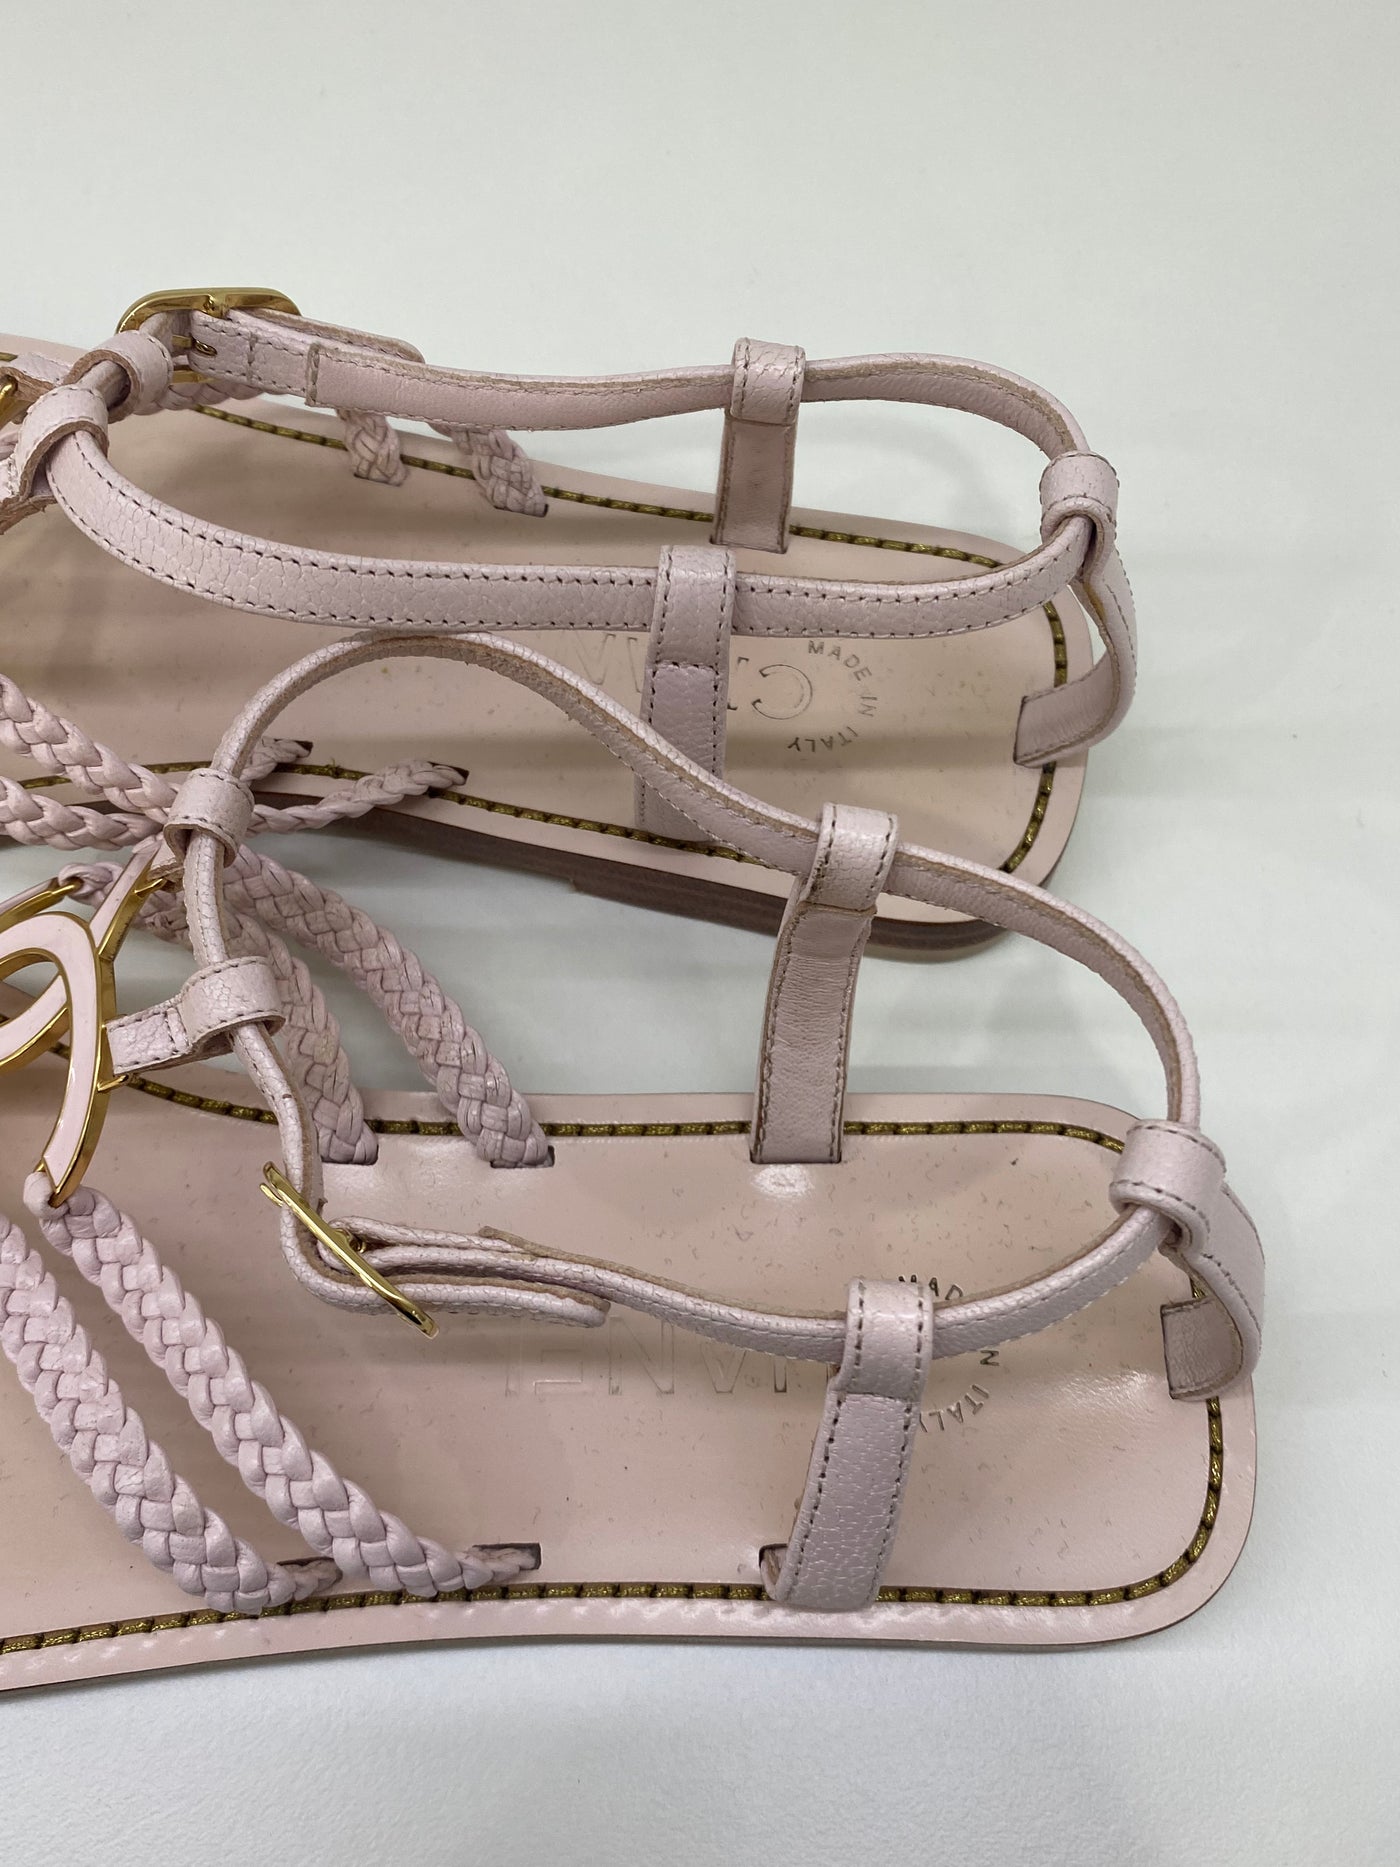 Chanel Baby Pink Sandals 38